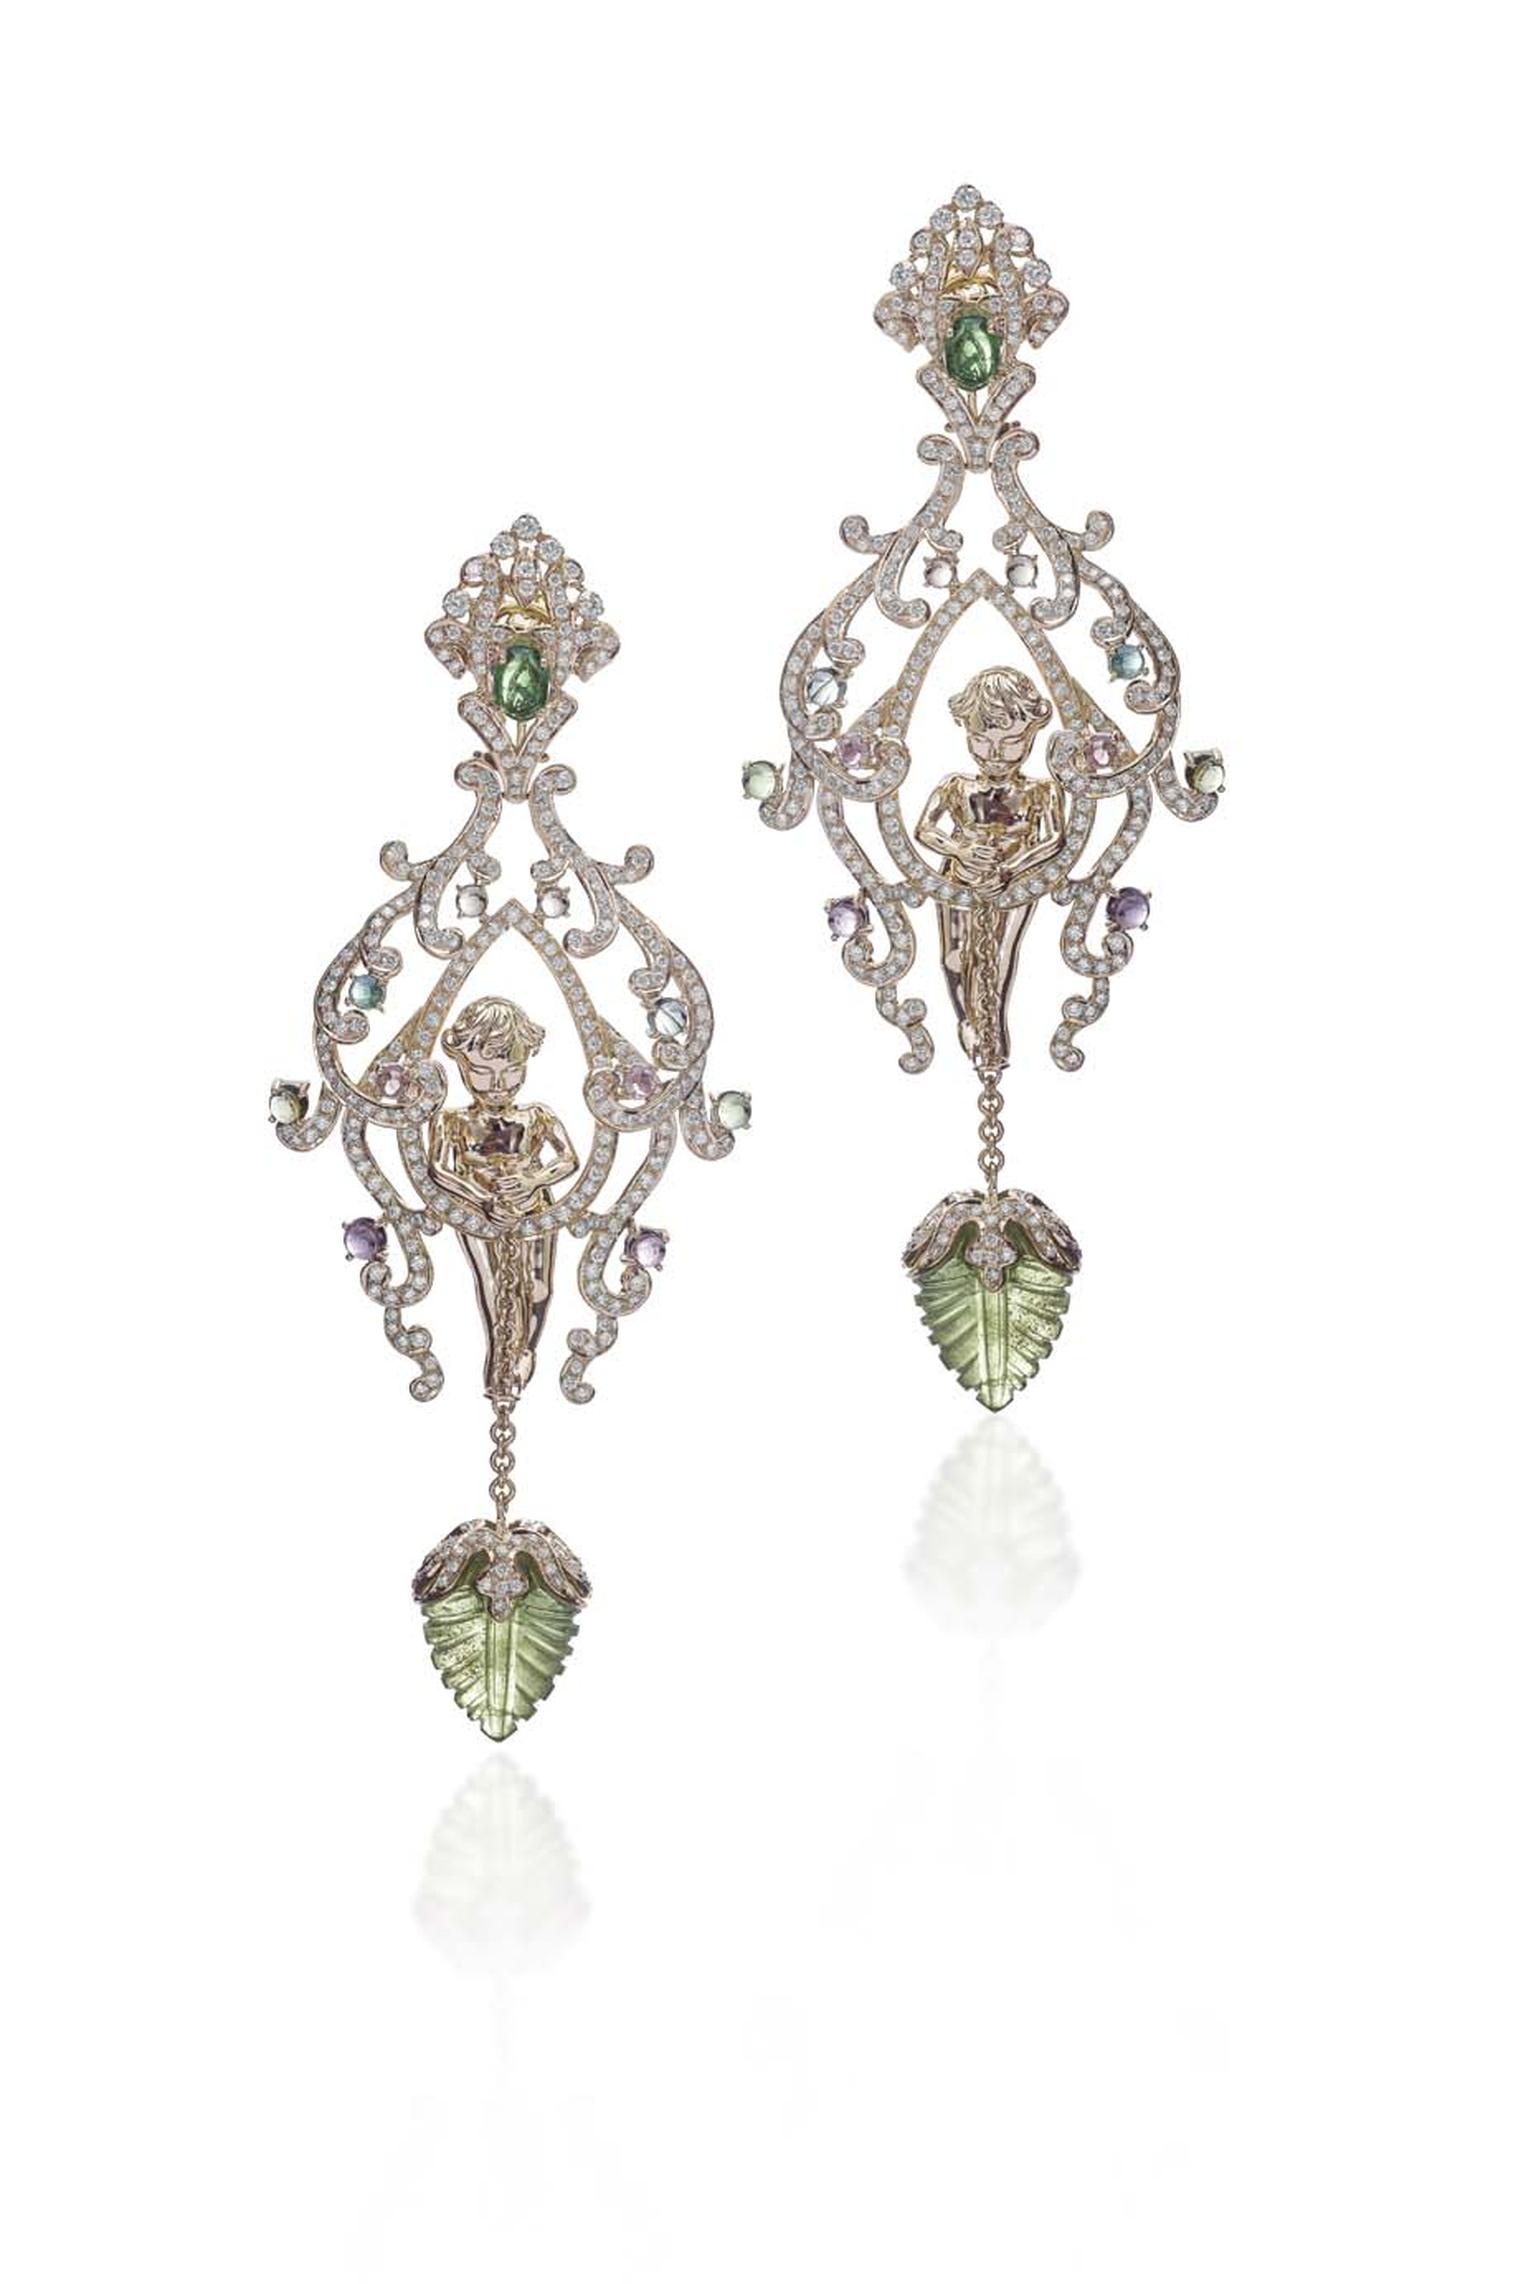 Farah Khan chandelier gold Angel earrings, inspired by Victorian elegance, set with peridot leaf carvings, multi-coloured tourmaline cabochons and diamonds.